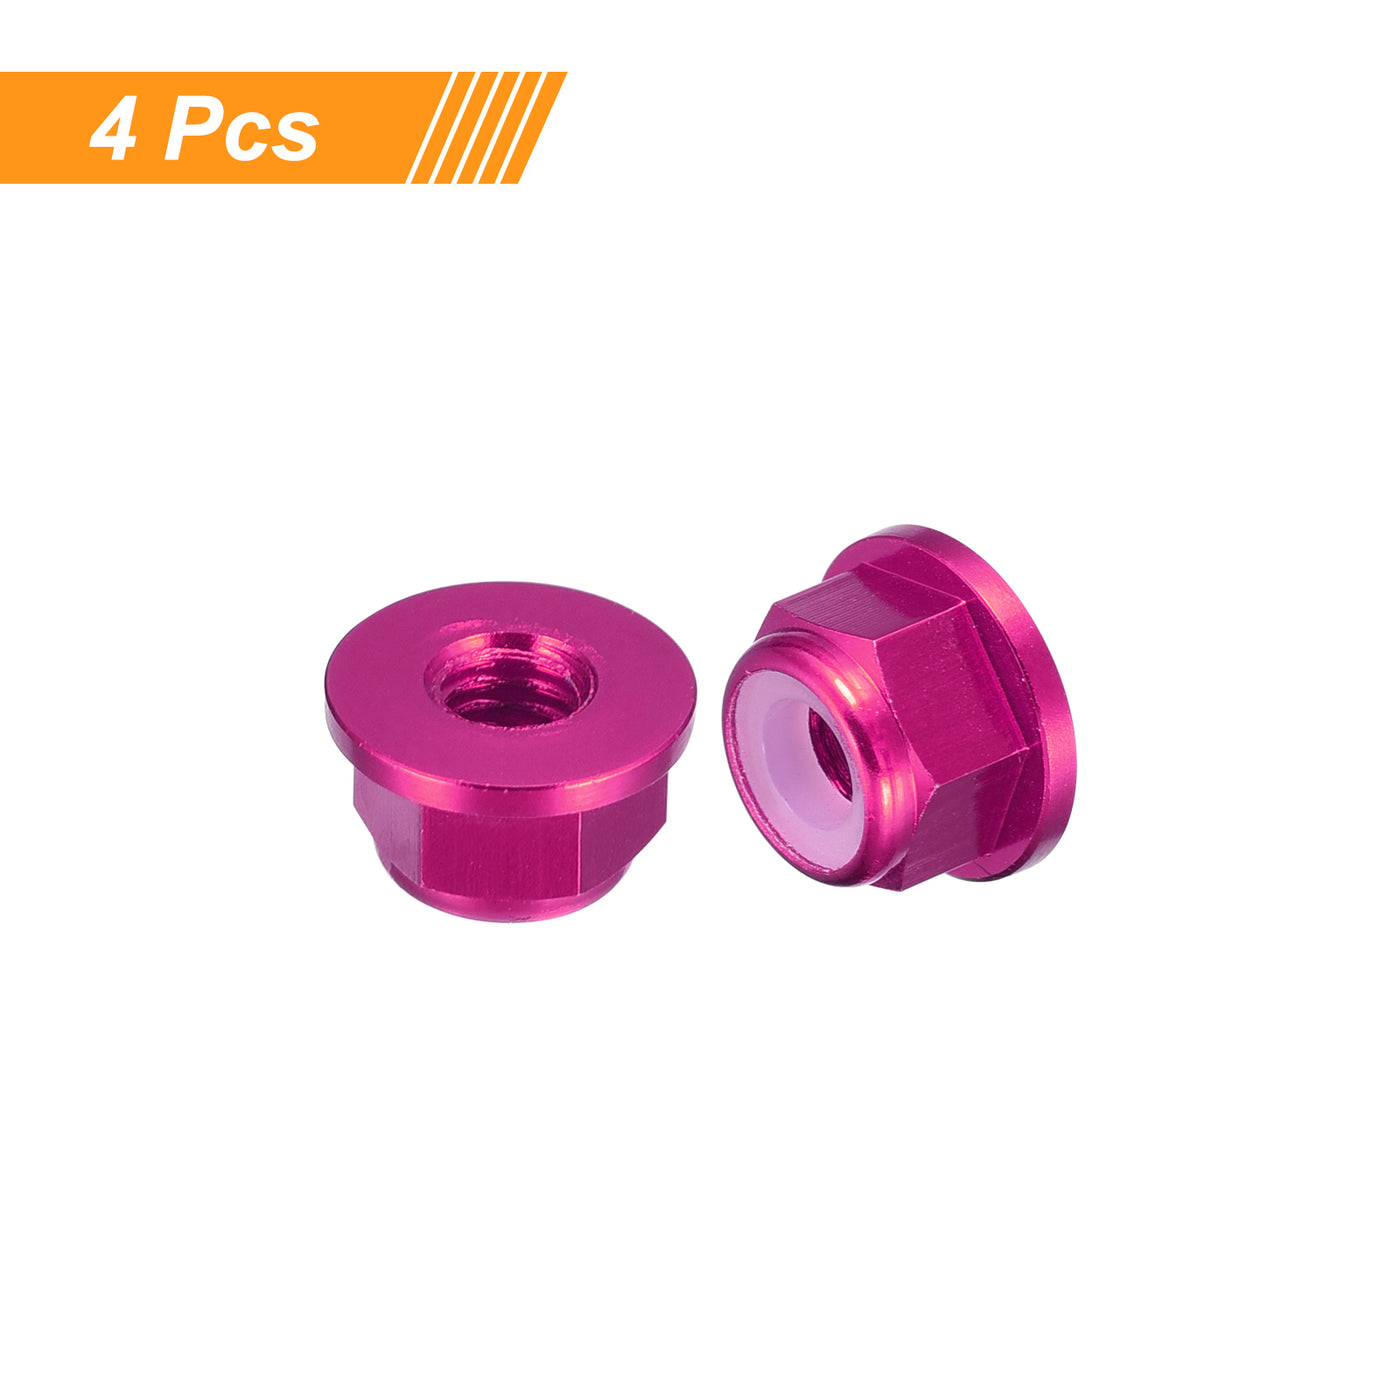 uxcell Uxcell Nylon Insert Hex Lock Nuts, 4pcs - M4 x 0.7mm Aluminum Alloy Self-Locking Nut, Anodizing Flange Lock Nut for Fasteners (Pink)